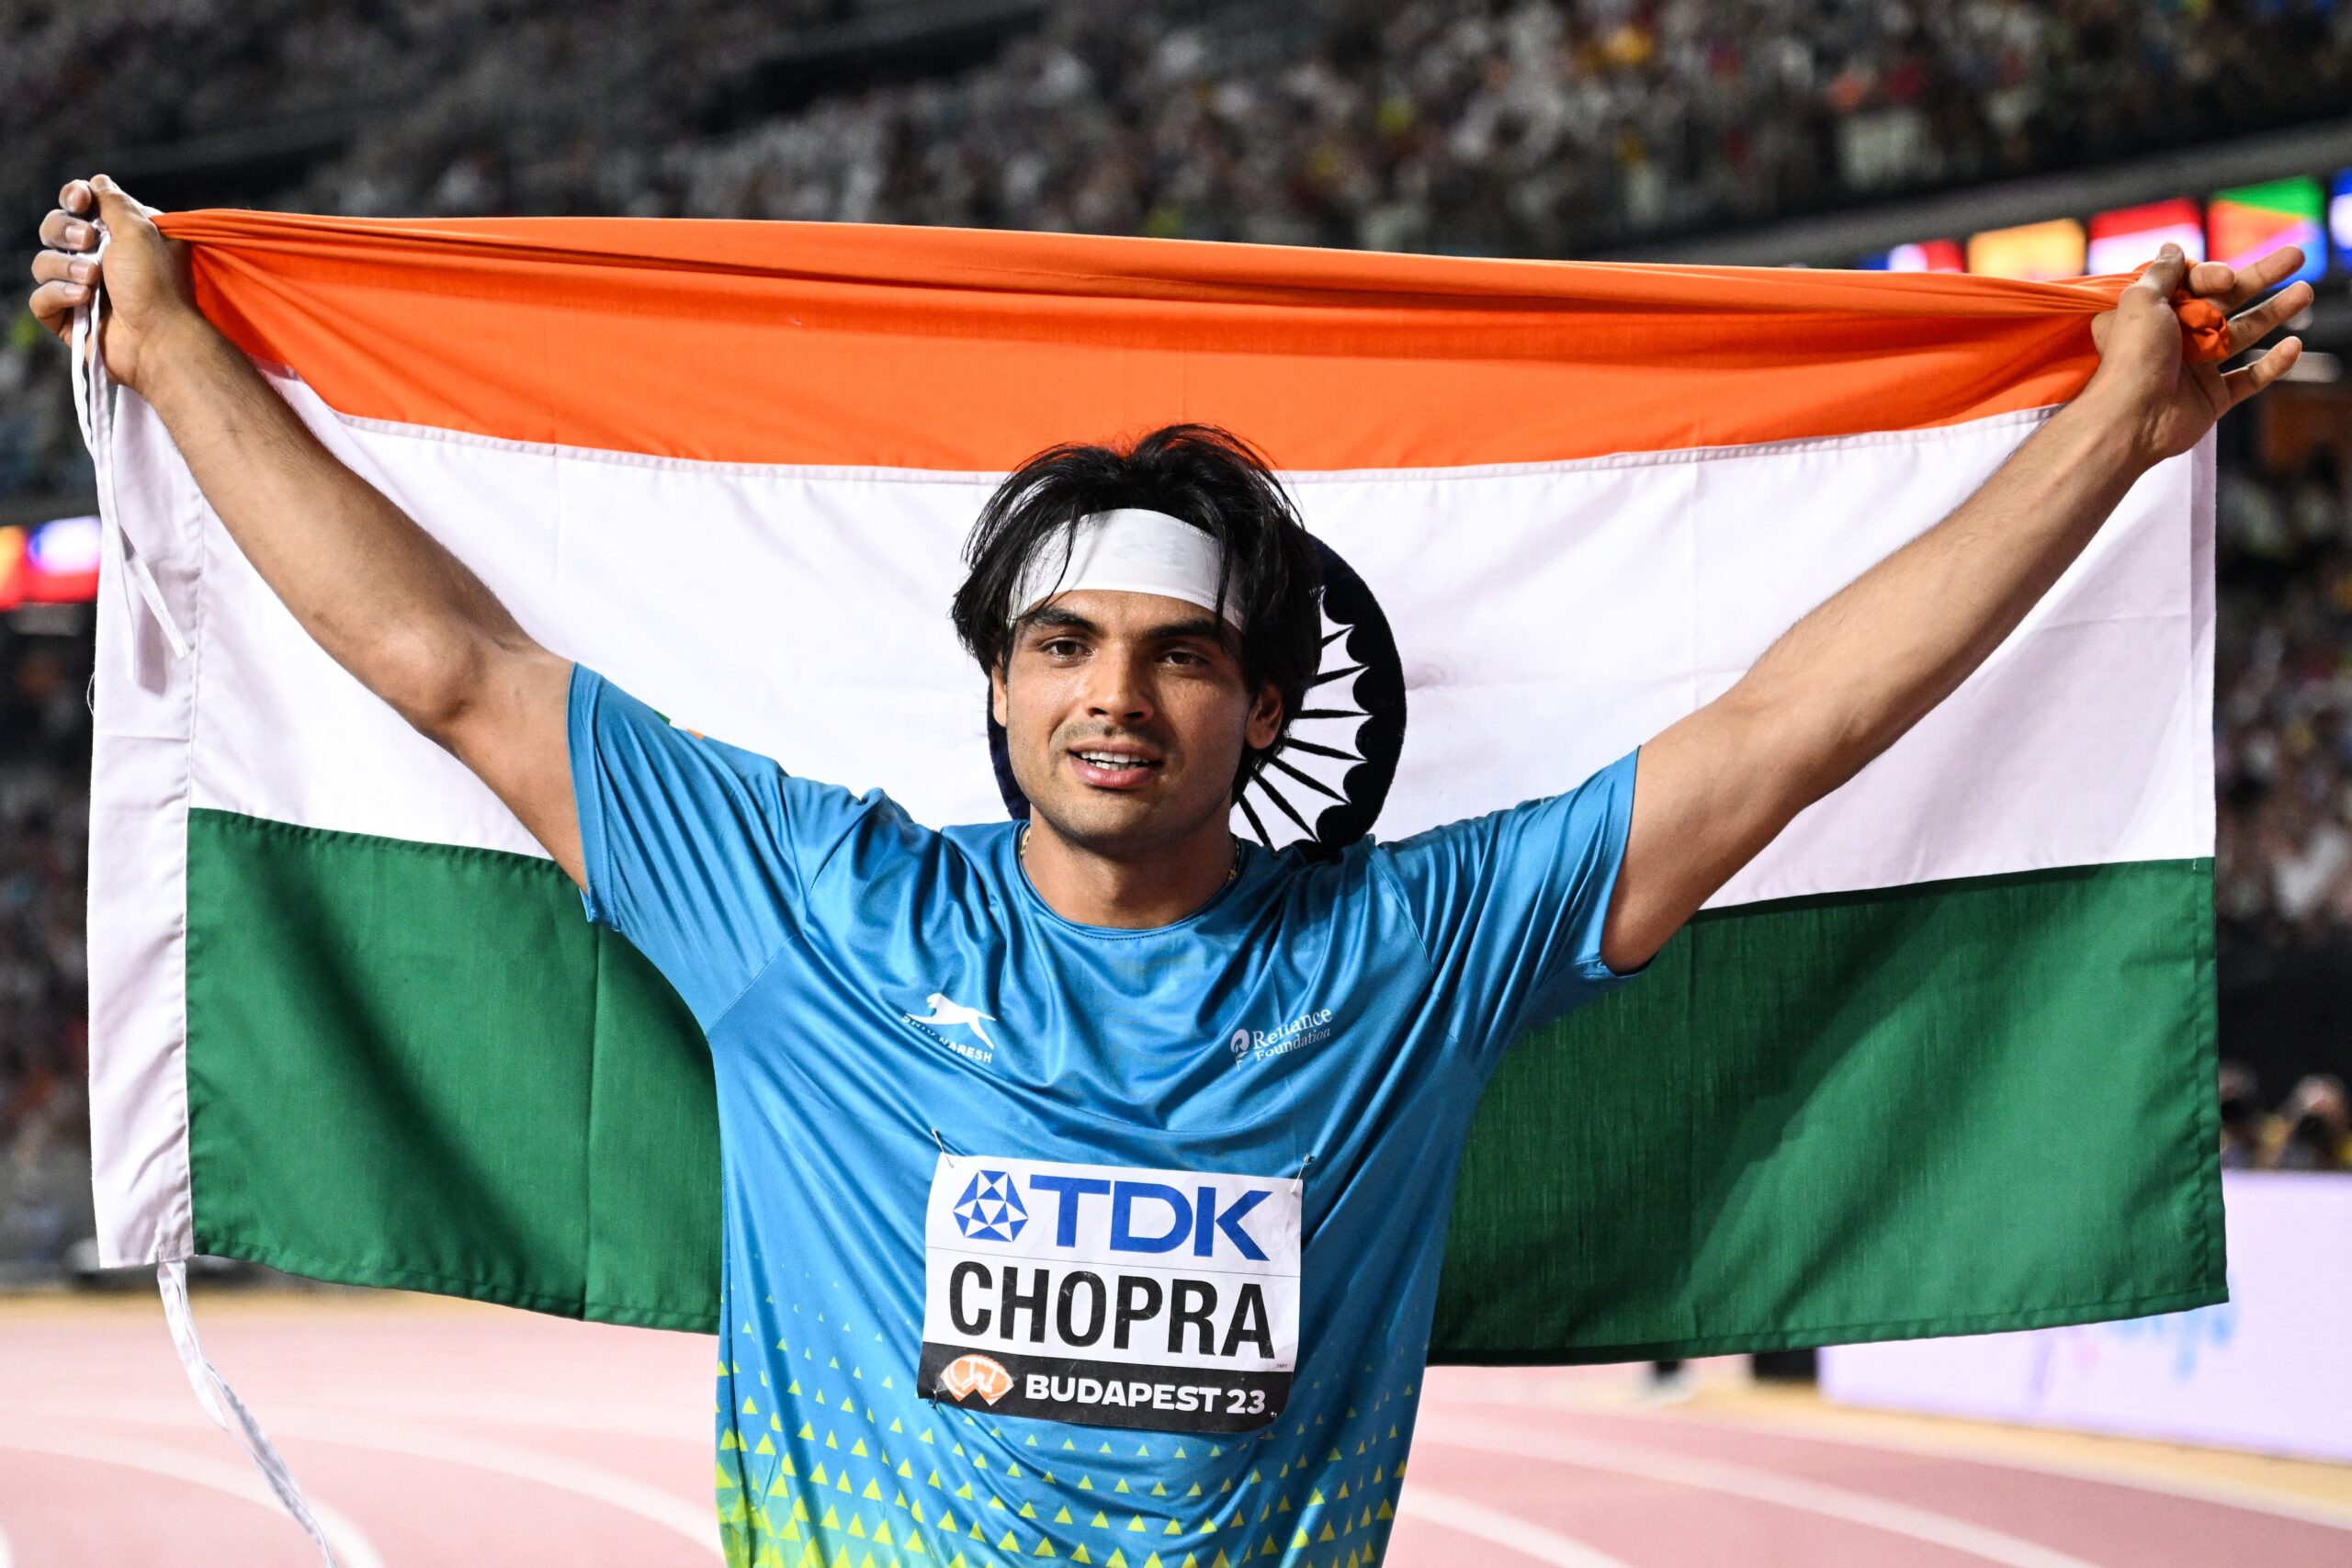 Neeraj Chopra Becomes 1st Indian To Win Gold At World Athletics Championships, Beats Pakistan’s Arshad Nadeem In Close Fight